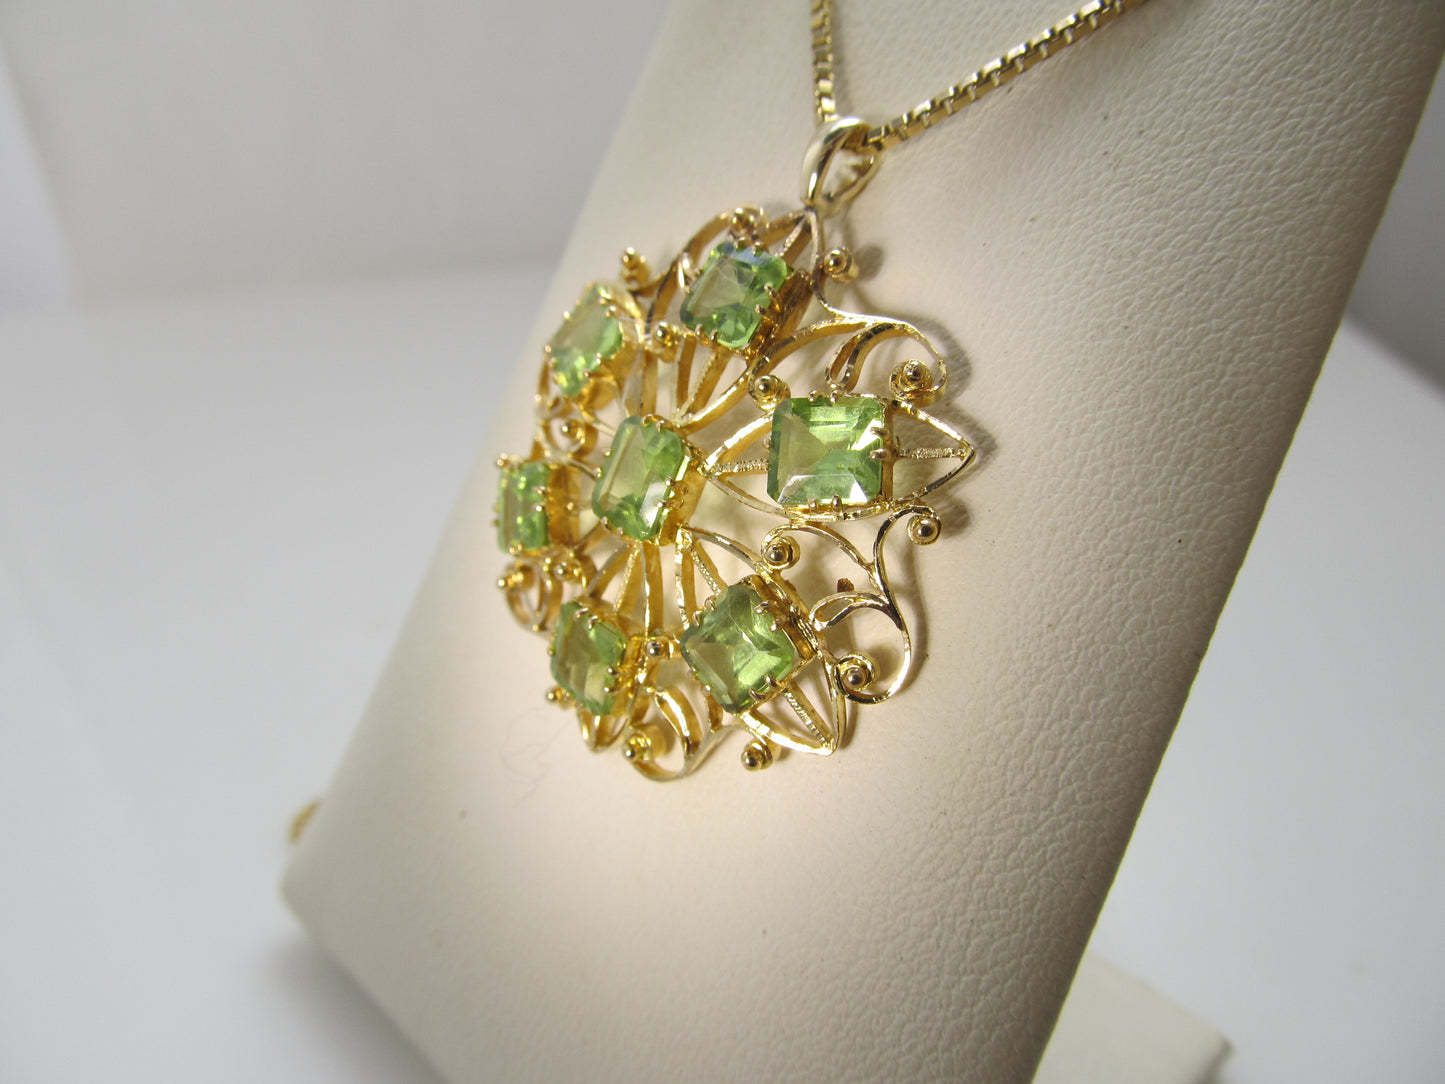 Vintage peridot necklace, 14k yellow gold